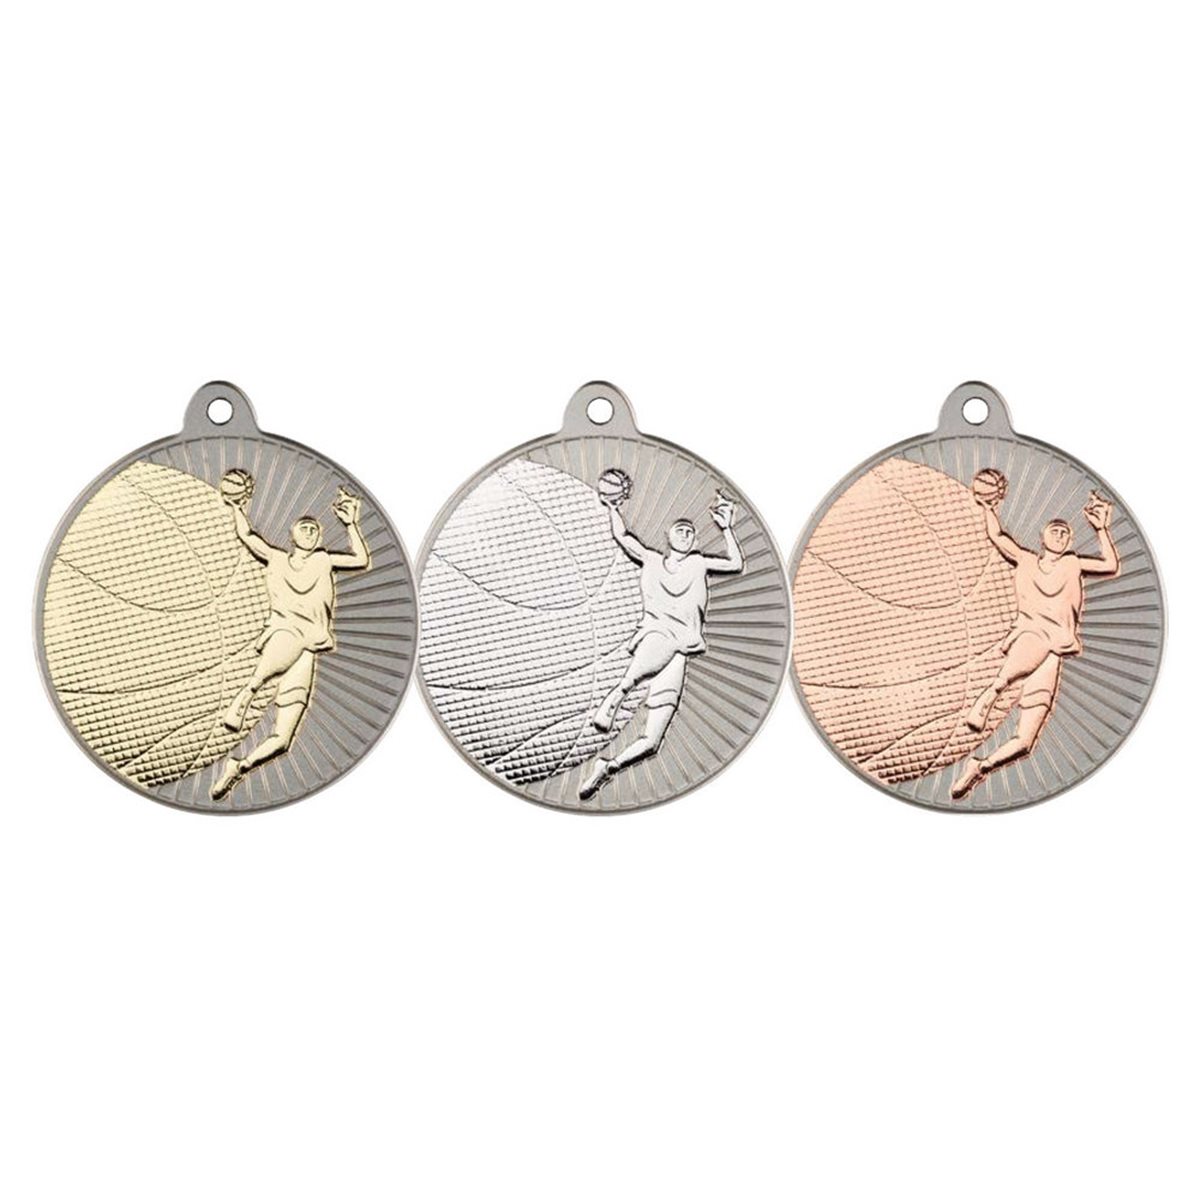 50mm Silver Two Colour Basketball Medal MV15